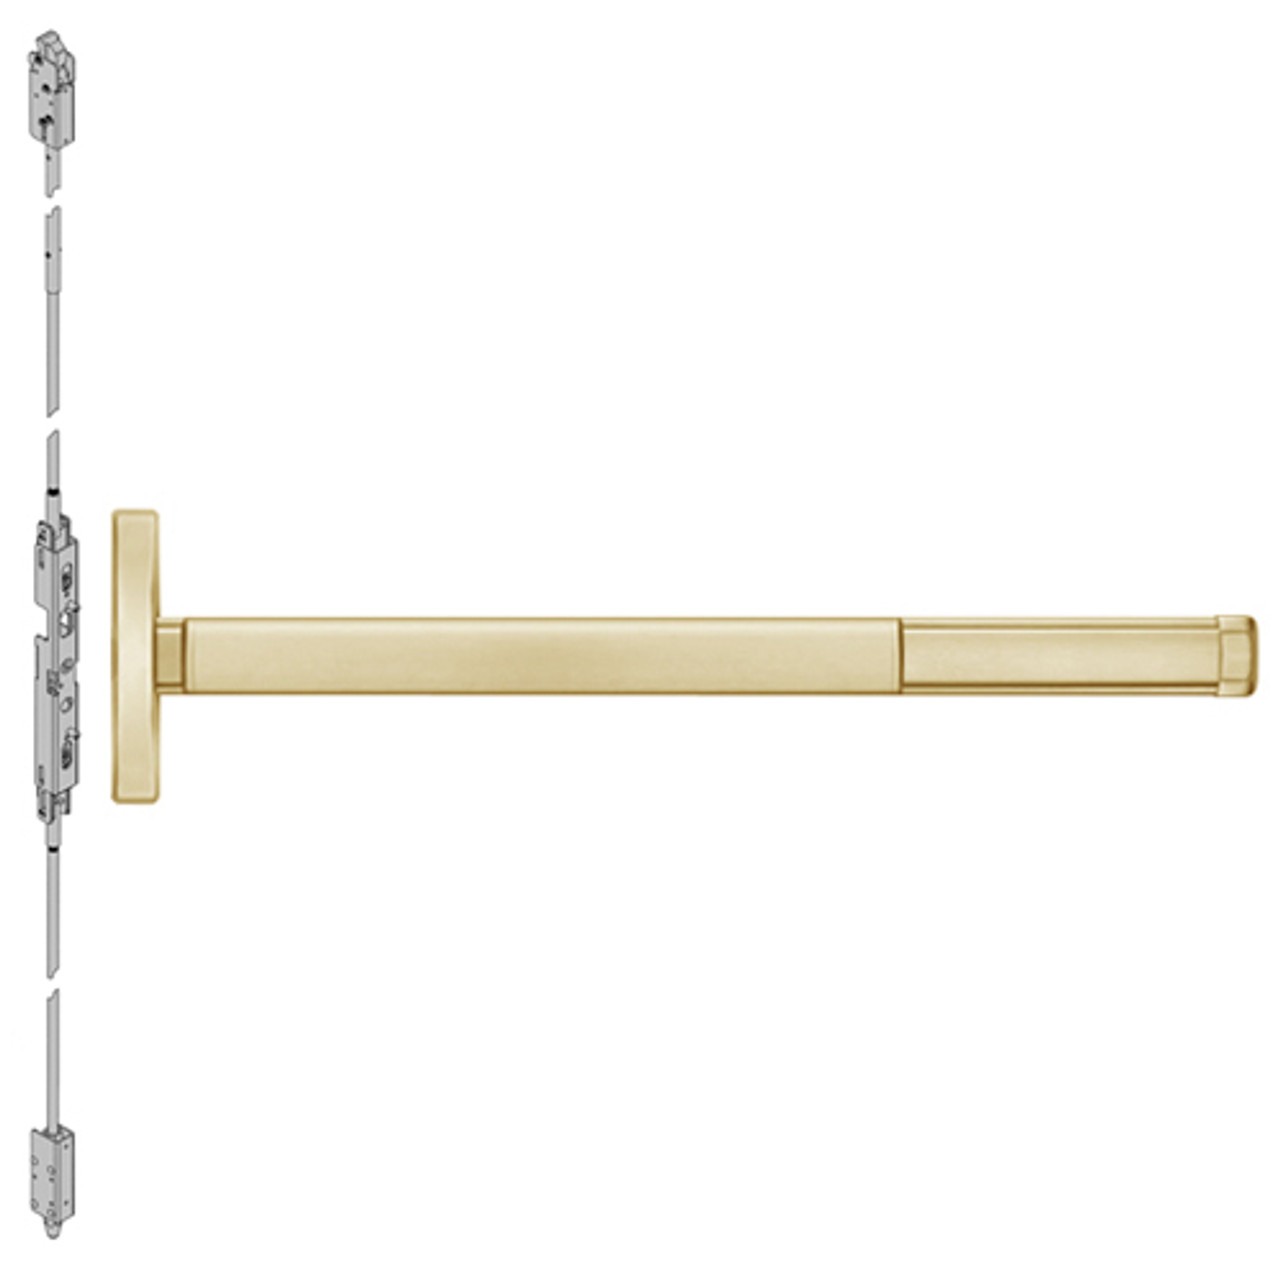 TS2601LBR-606-48 PHI 2600 Series Concealed Vertical Rod Exit Device with Touchbar Monitoring Switch Prepped for Cover Plate in Satin Brass Finish